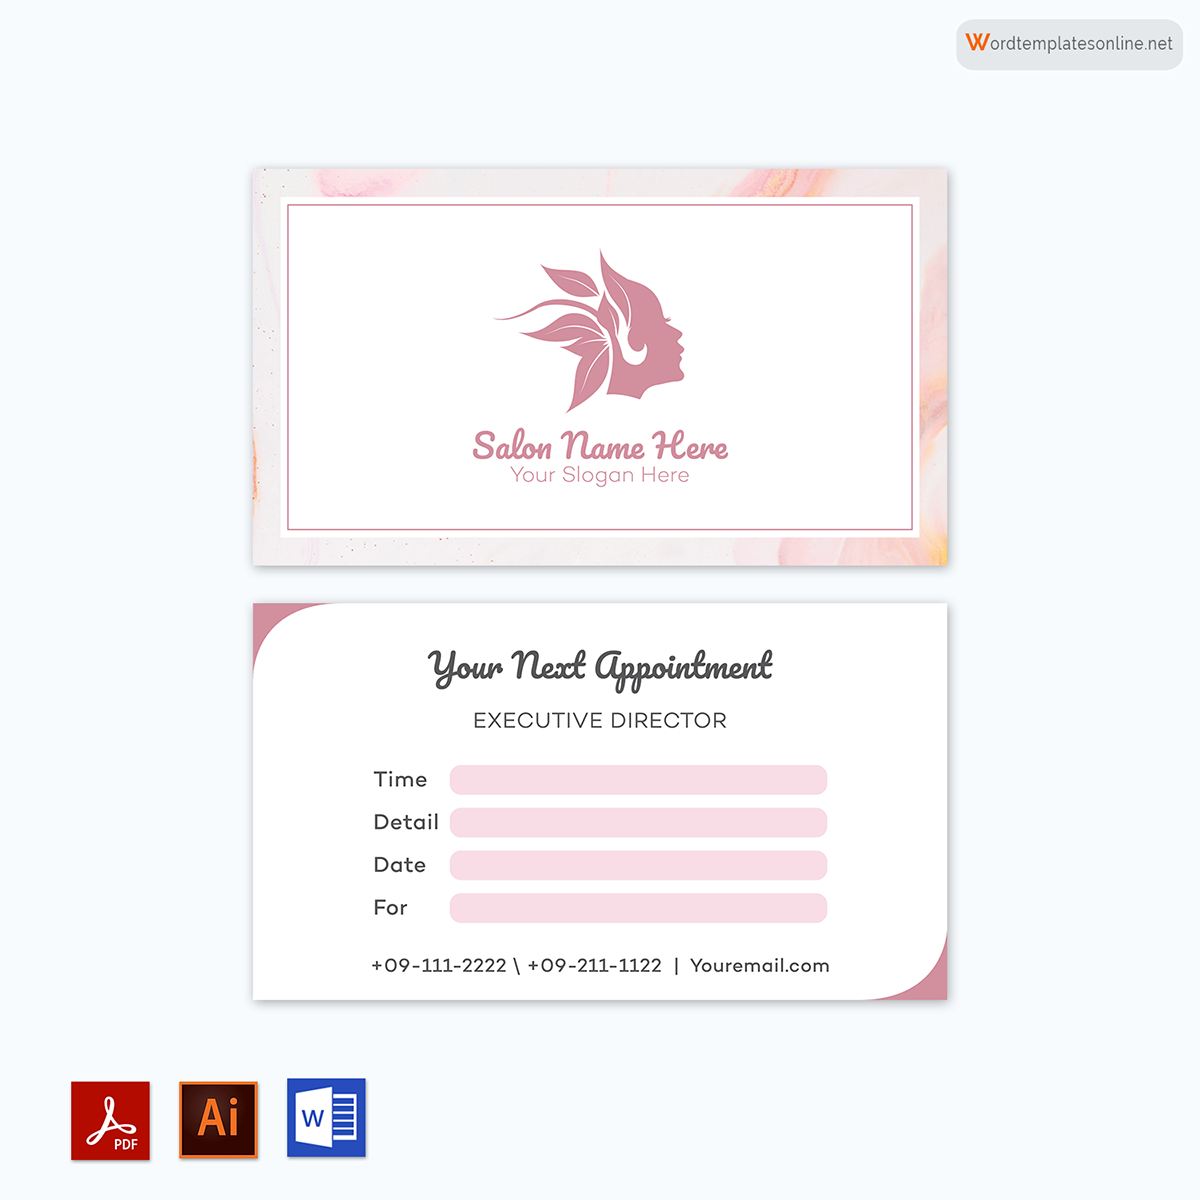 Appointment Card Template - Customizable Design